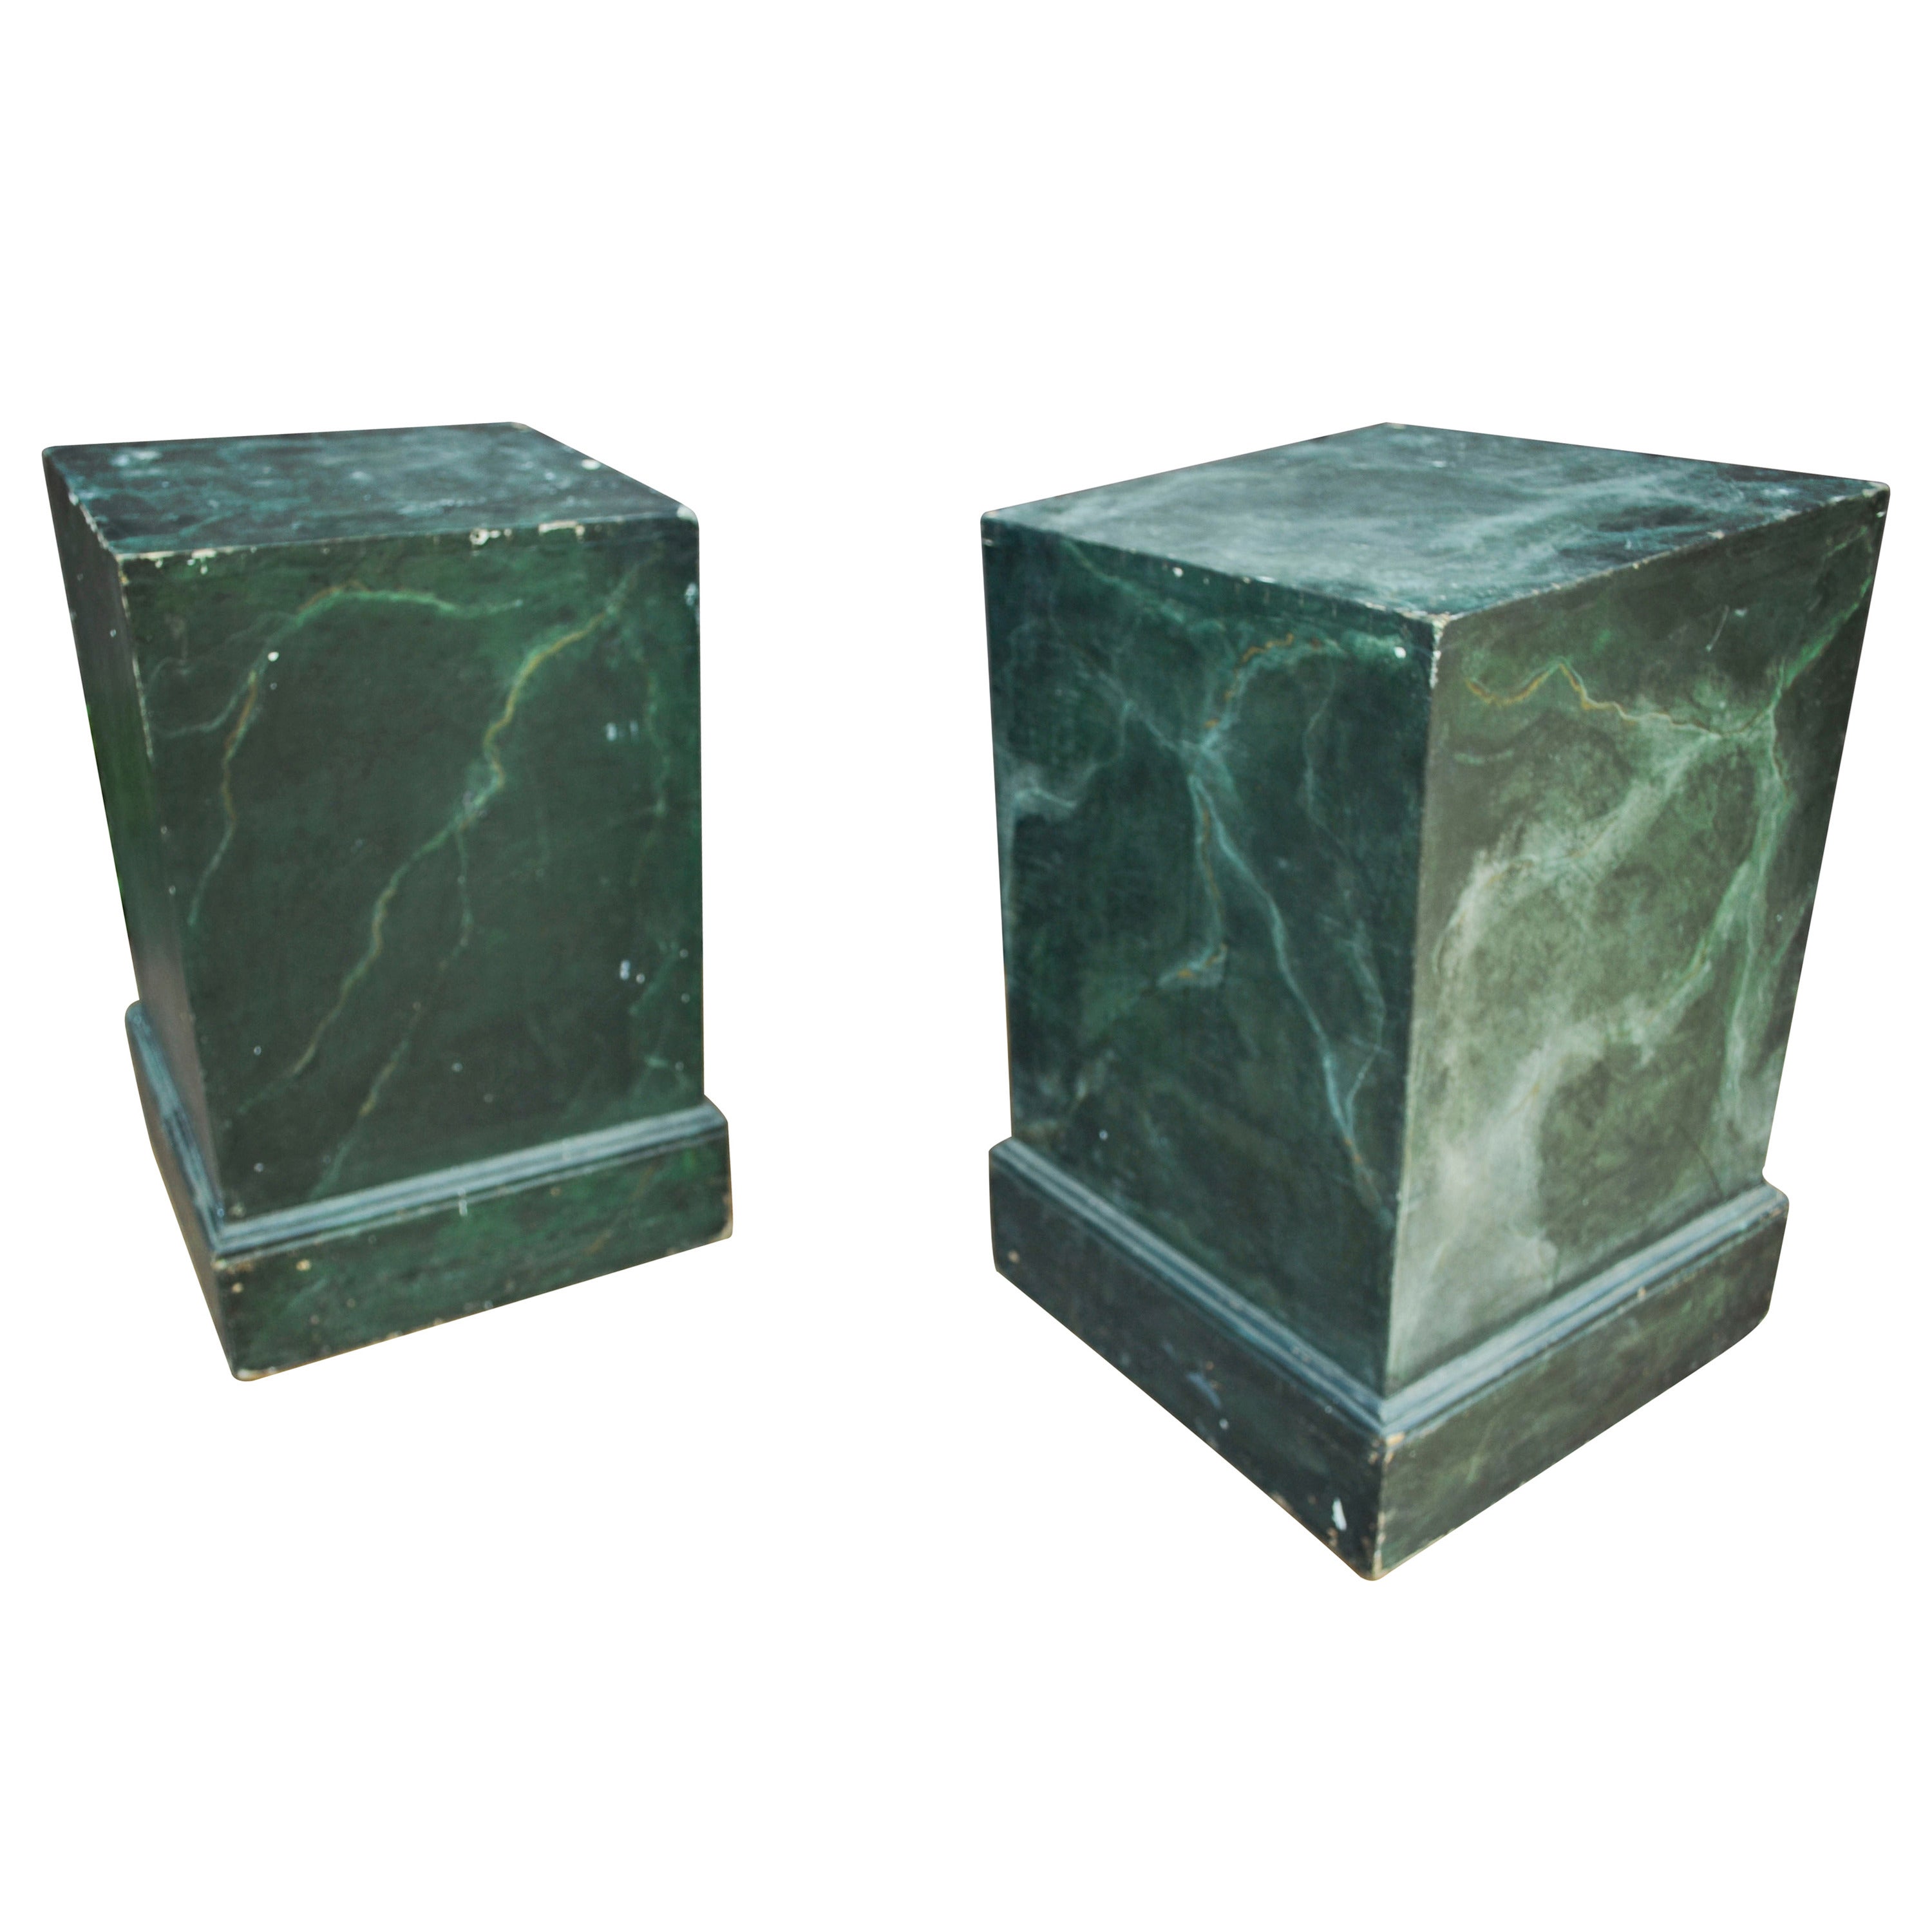 Pair of Vintage Malachite Painted Wood Pedestals, c. Early 20th Century